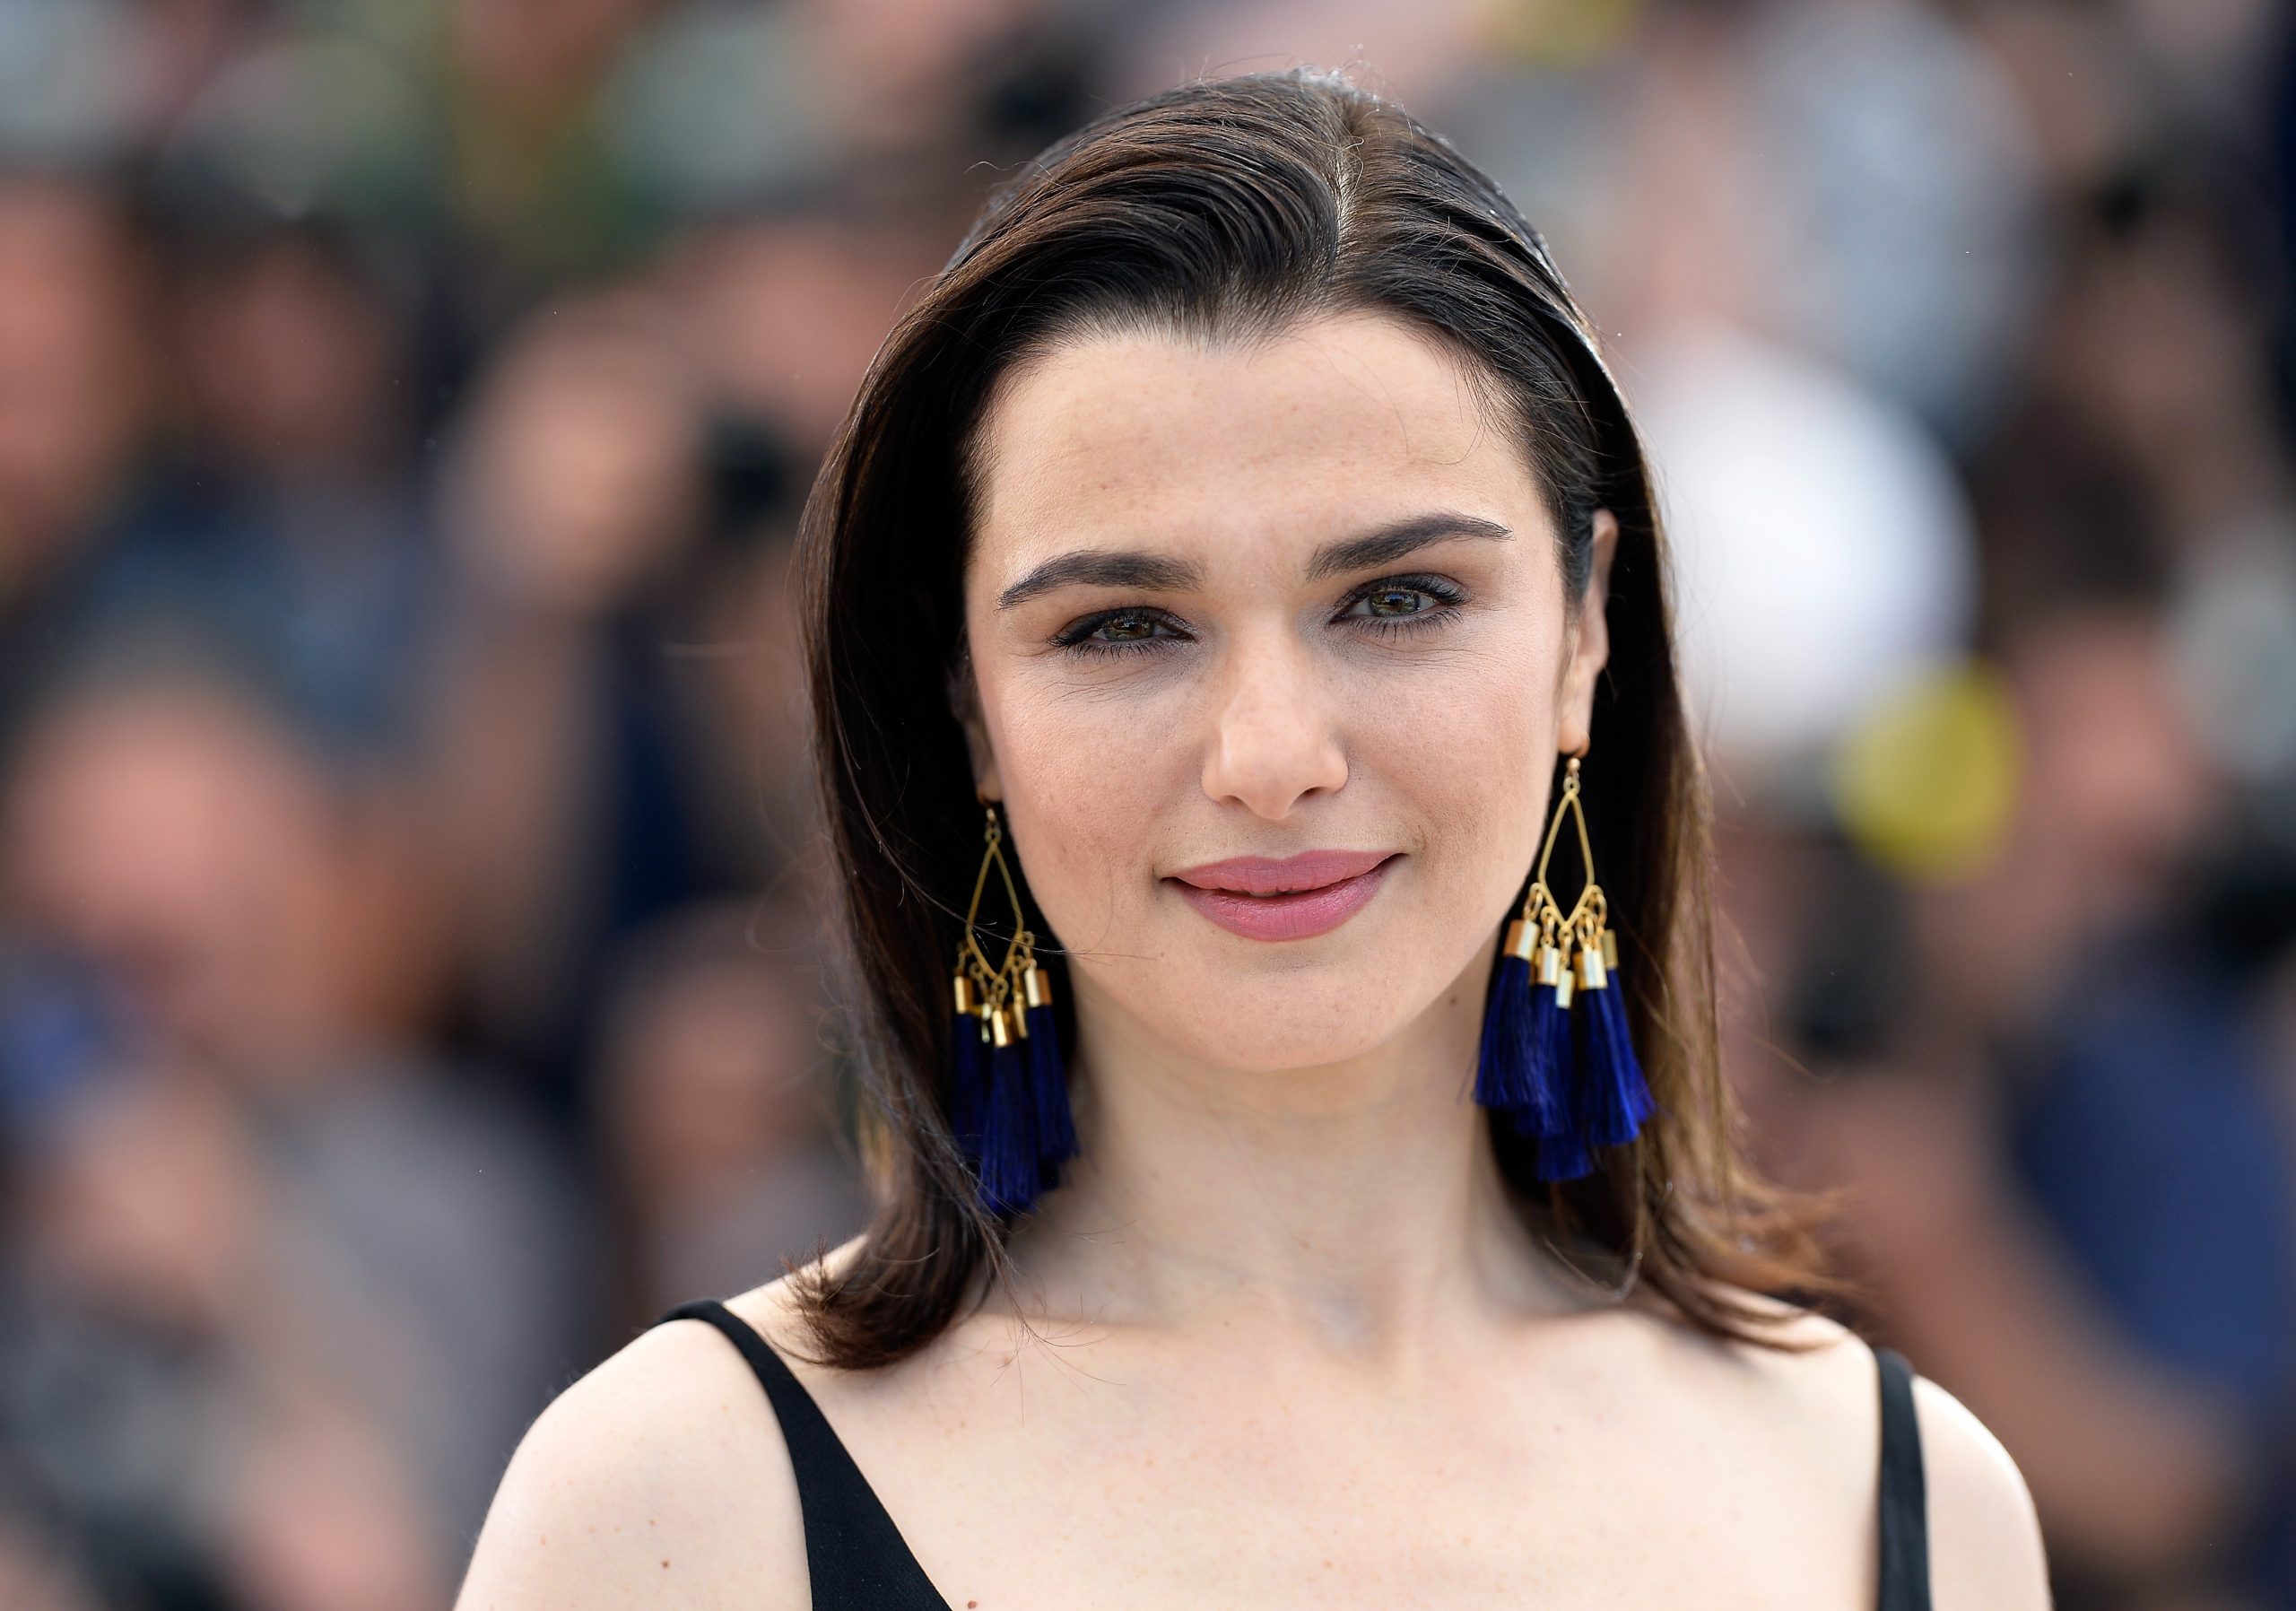 Actress Rachel Weisz on May 15, 2015, in Cannes, France.  (Photo by Pascal Le Segretain/Getty Images)